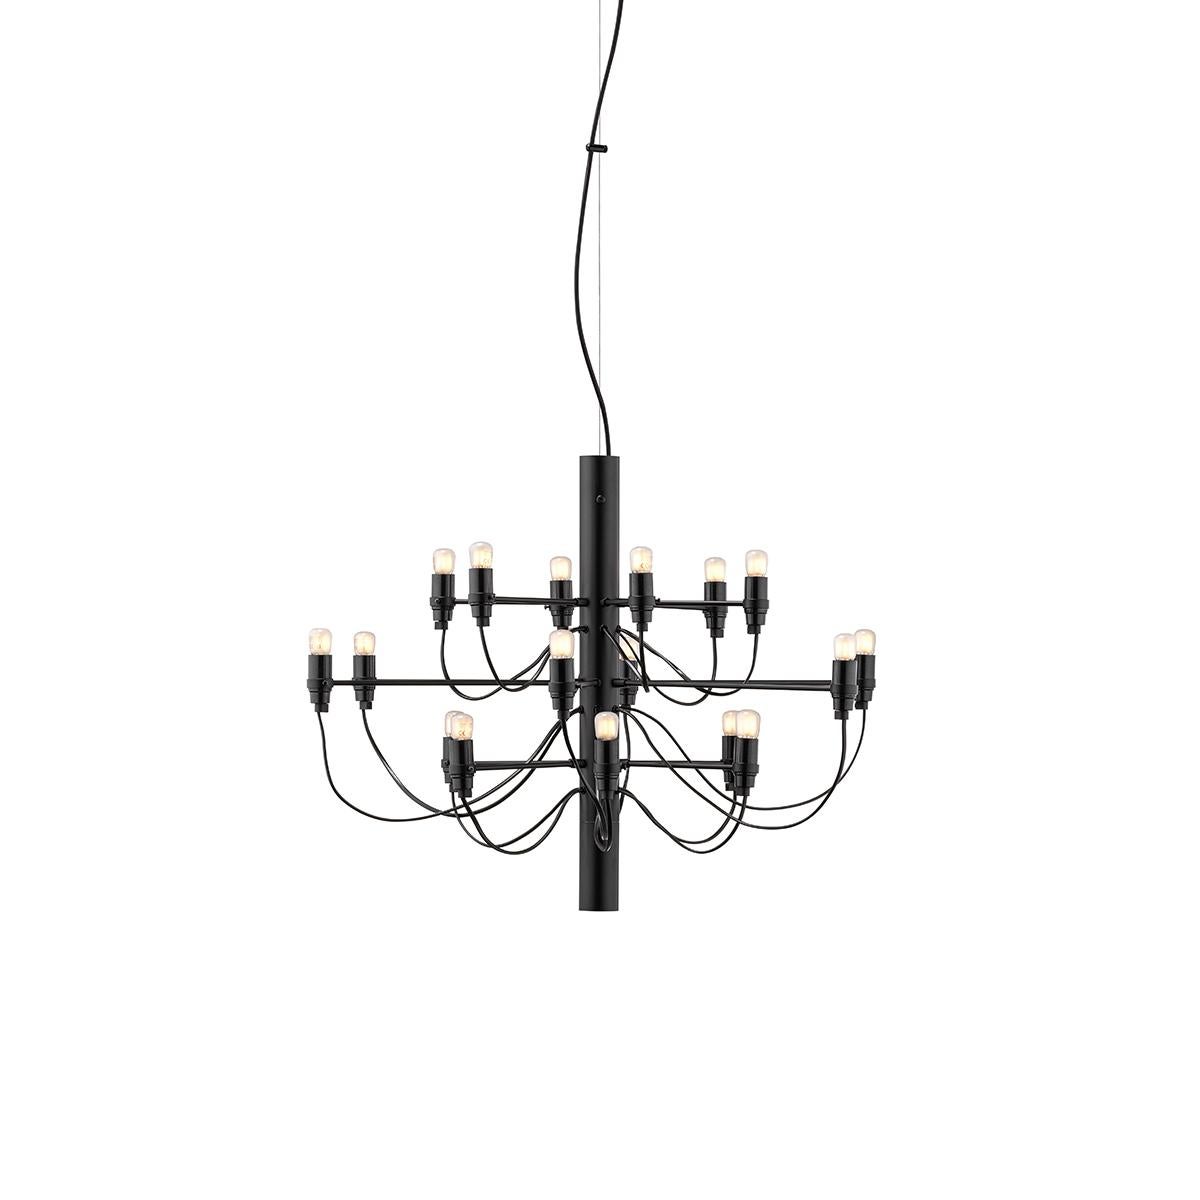 For Sale: Black (Matte Black) FLOS 2097/18 Suspension Lamp in Steel and Brass, by Gino Sarfatti